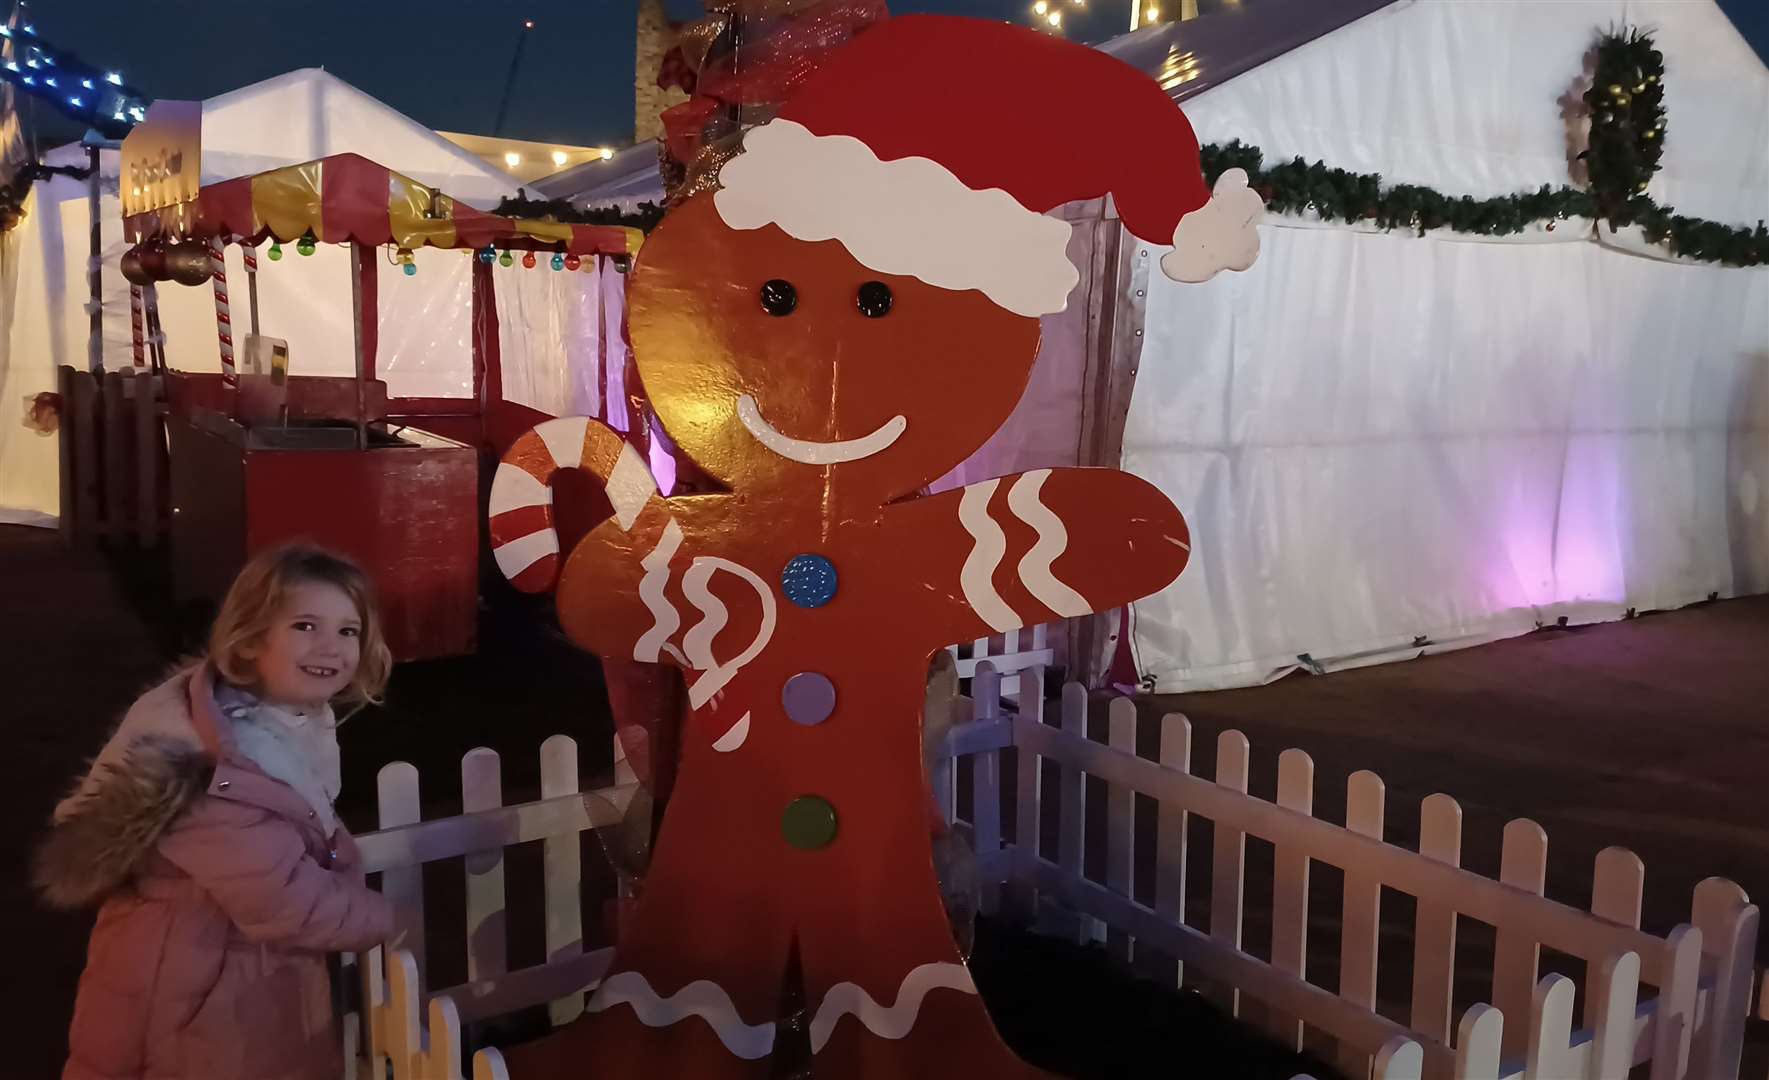 Time for a photo with the giant gingerbread man while we wait to go in